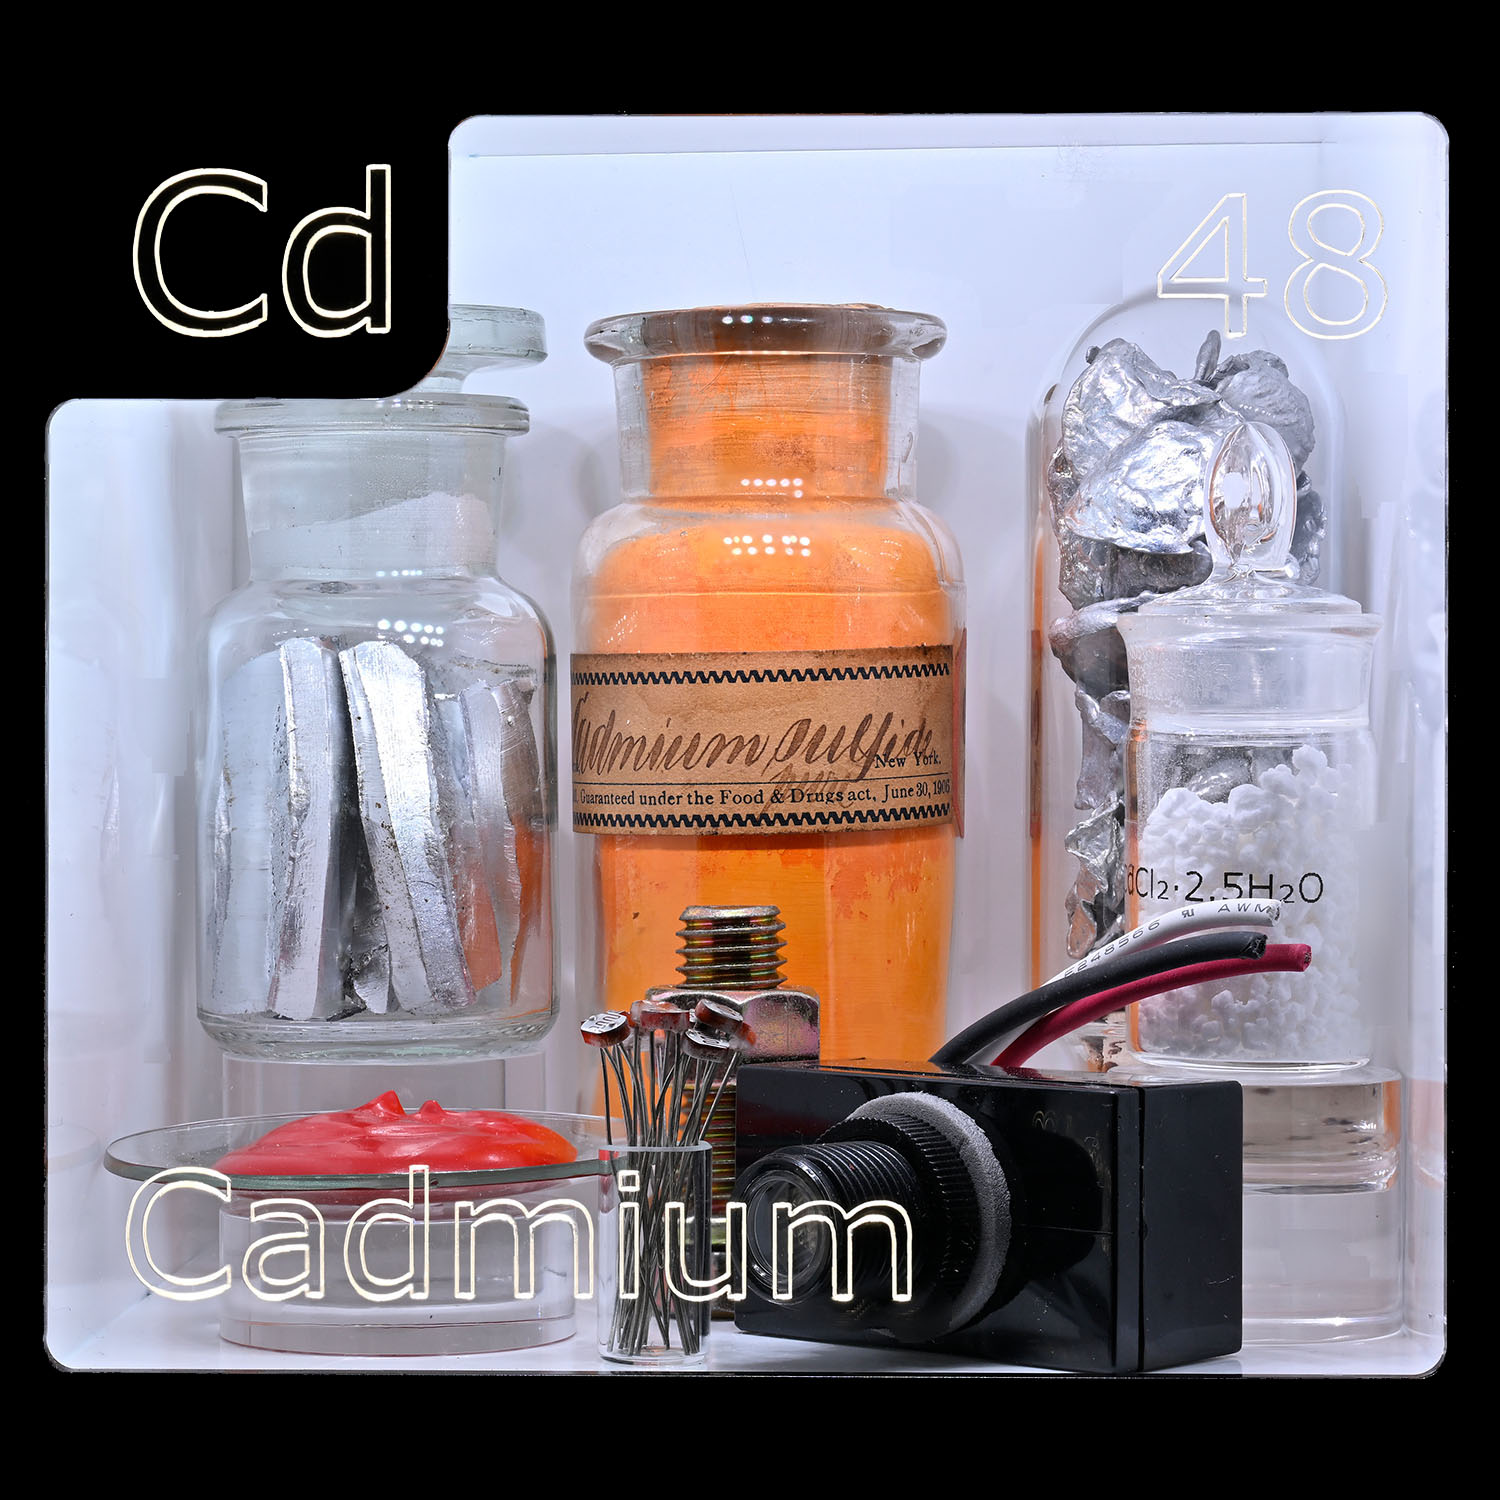 Periodic Table Display - close up Cadmium and the items that contain that element